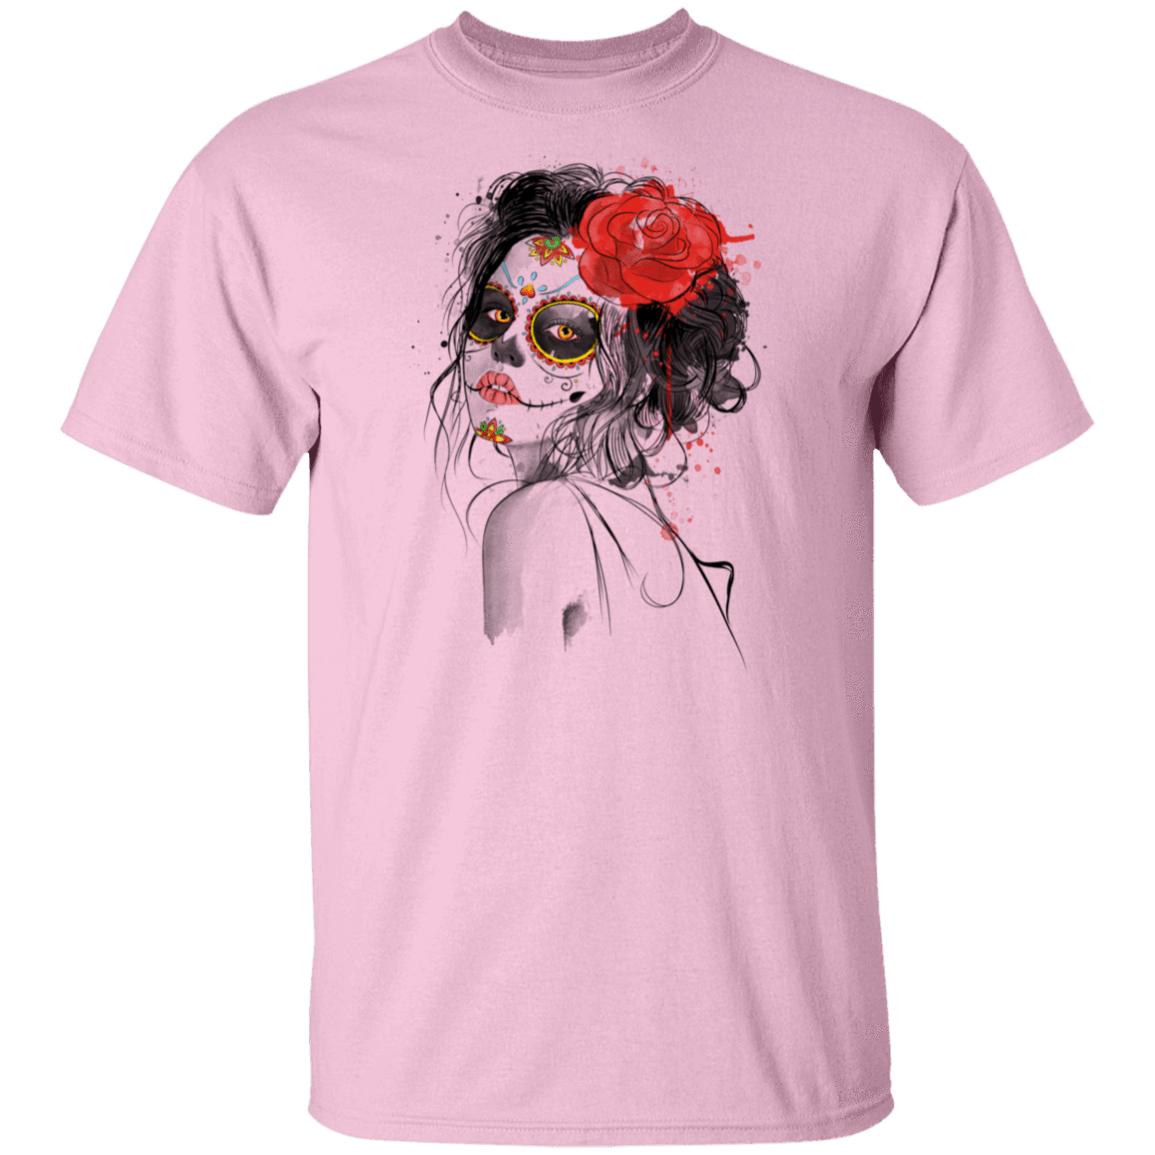 T-Shirts Light Pink / S Day of the Dead T-Shirt